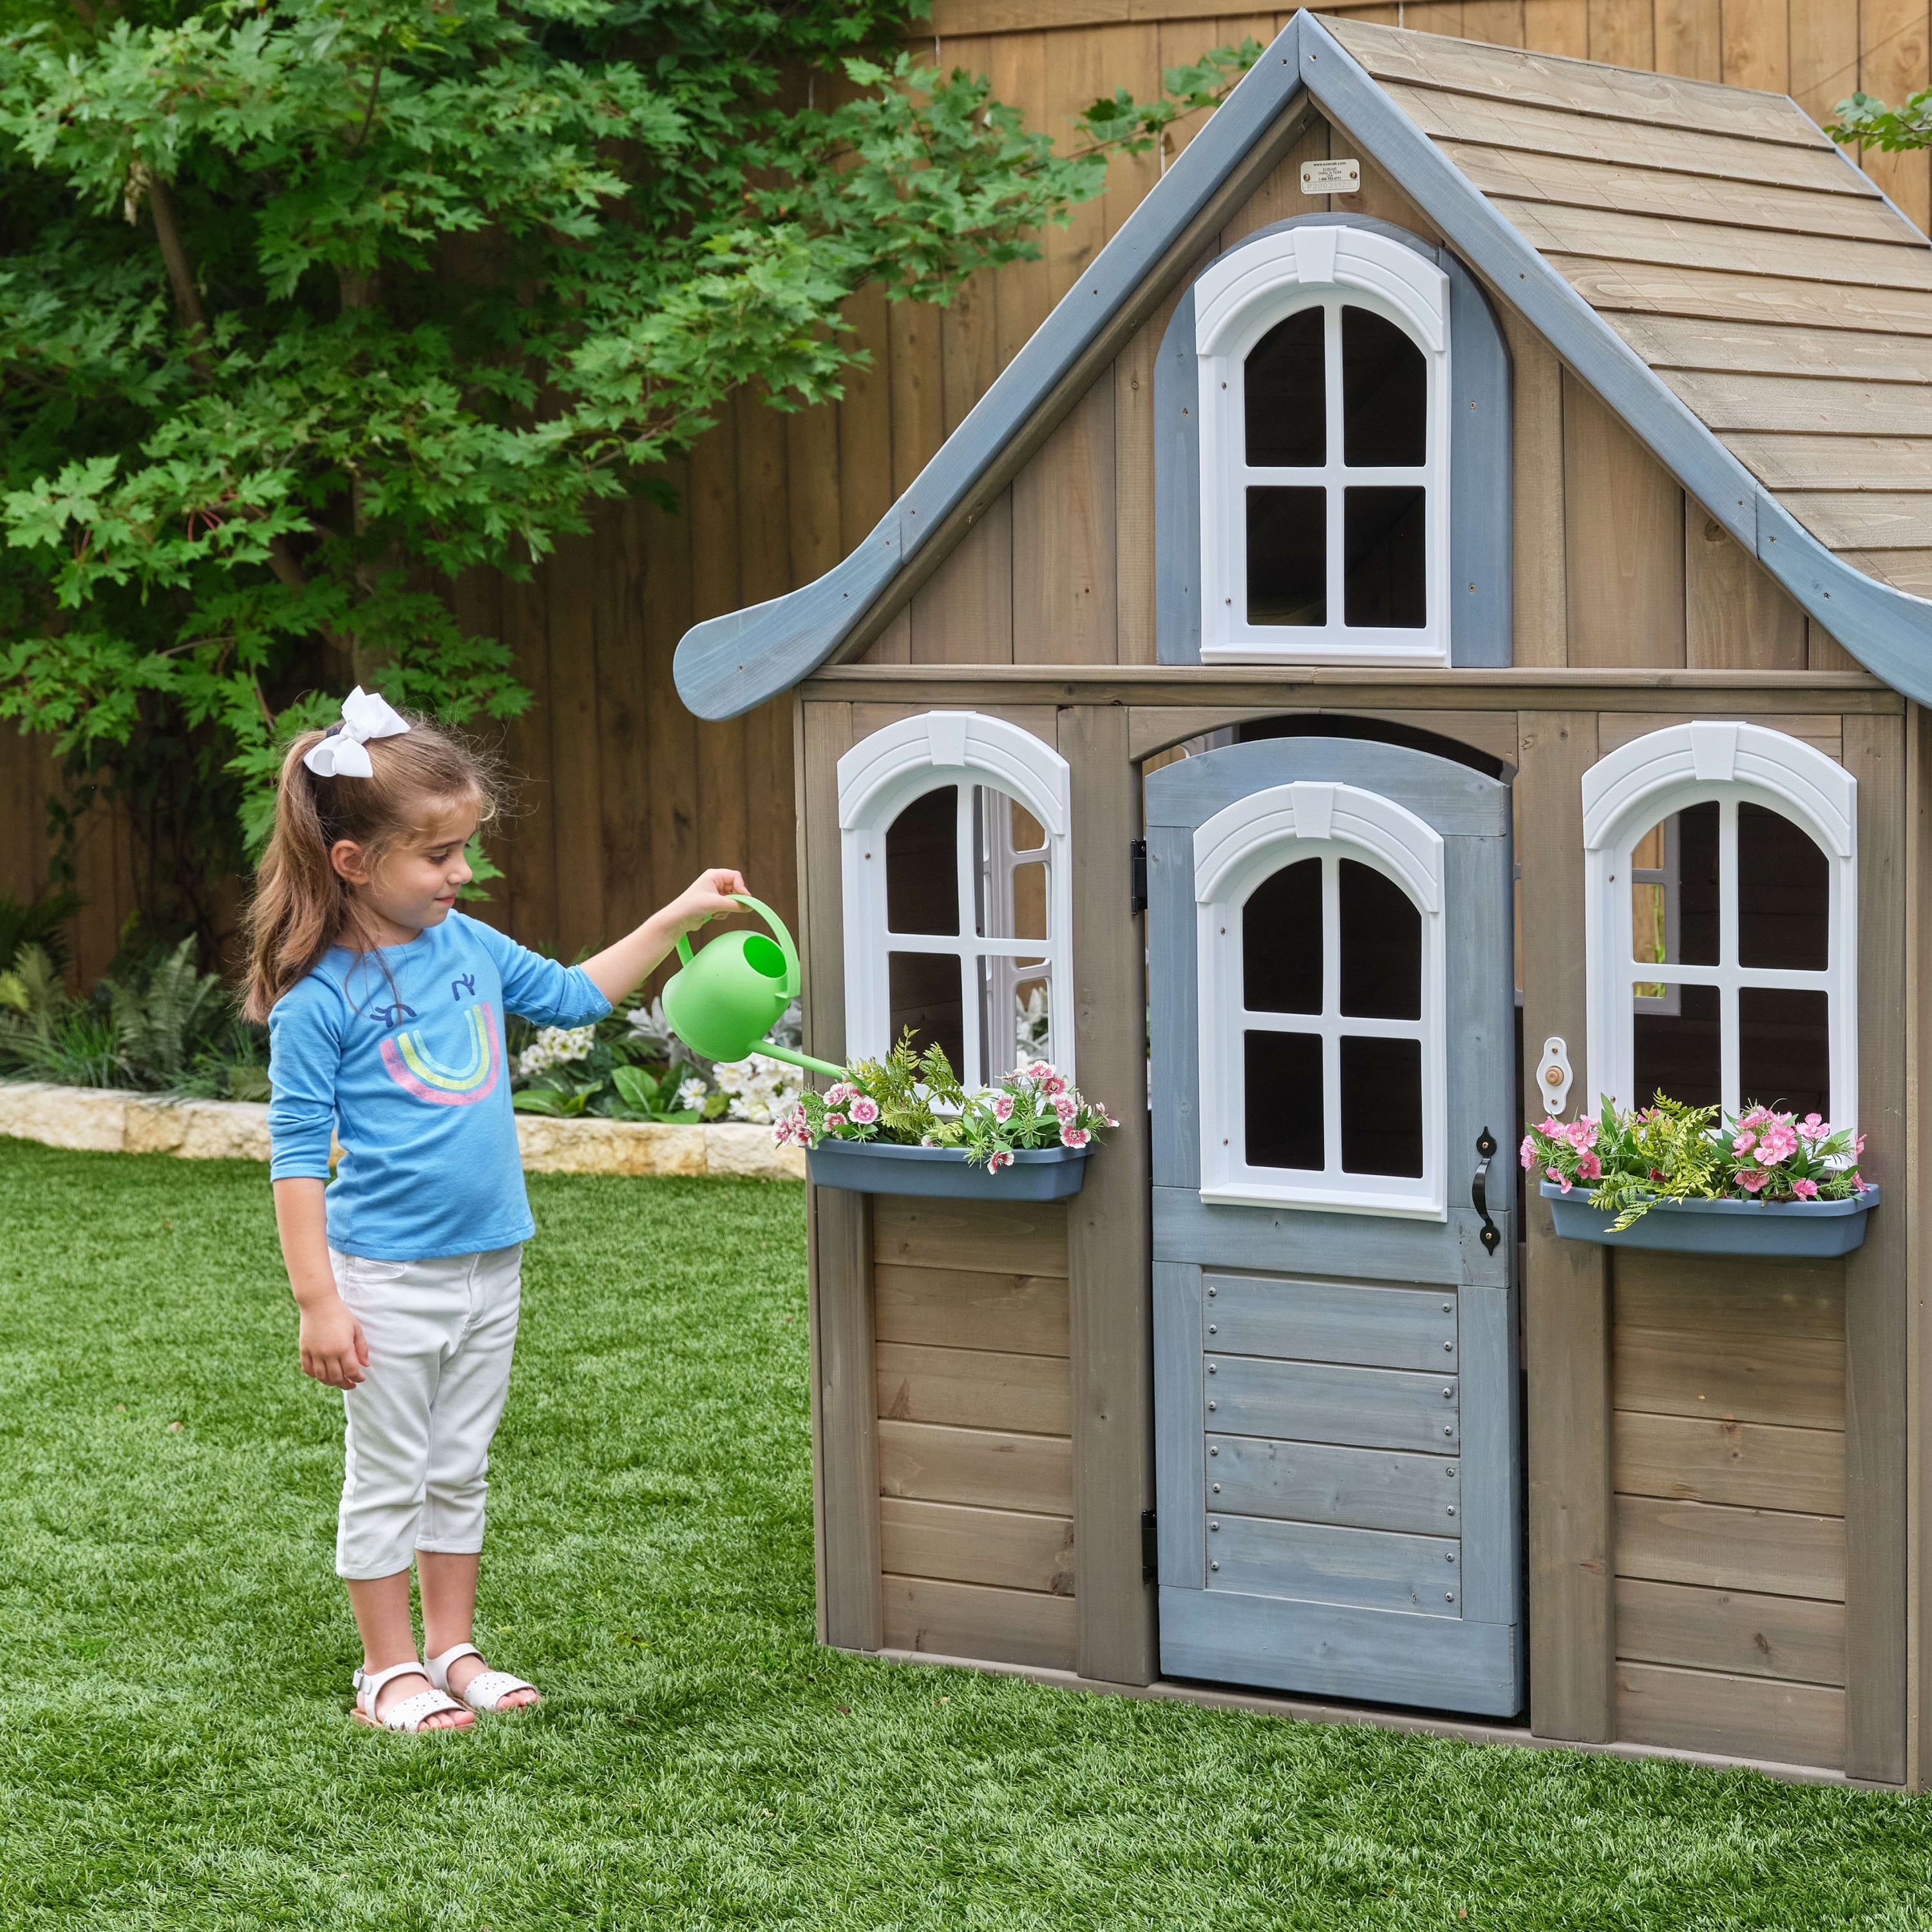 Kidkraft KidKraft Wooden Playhouse with Working Doorbell and Chalkboard  Large Side... 